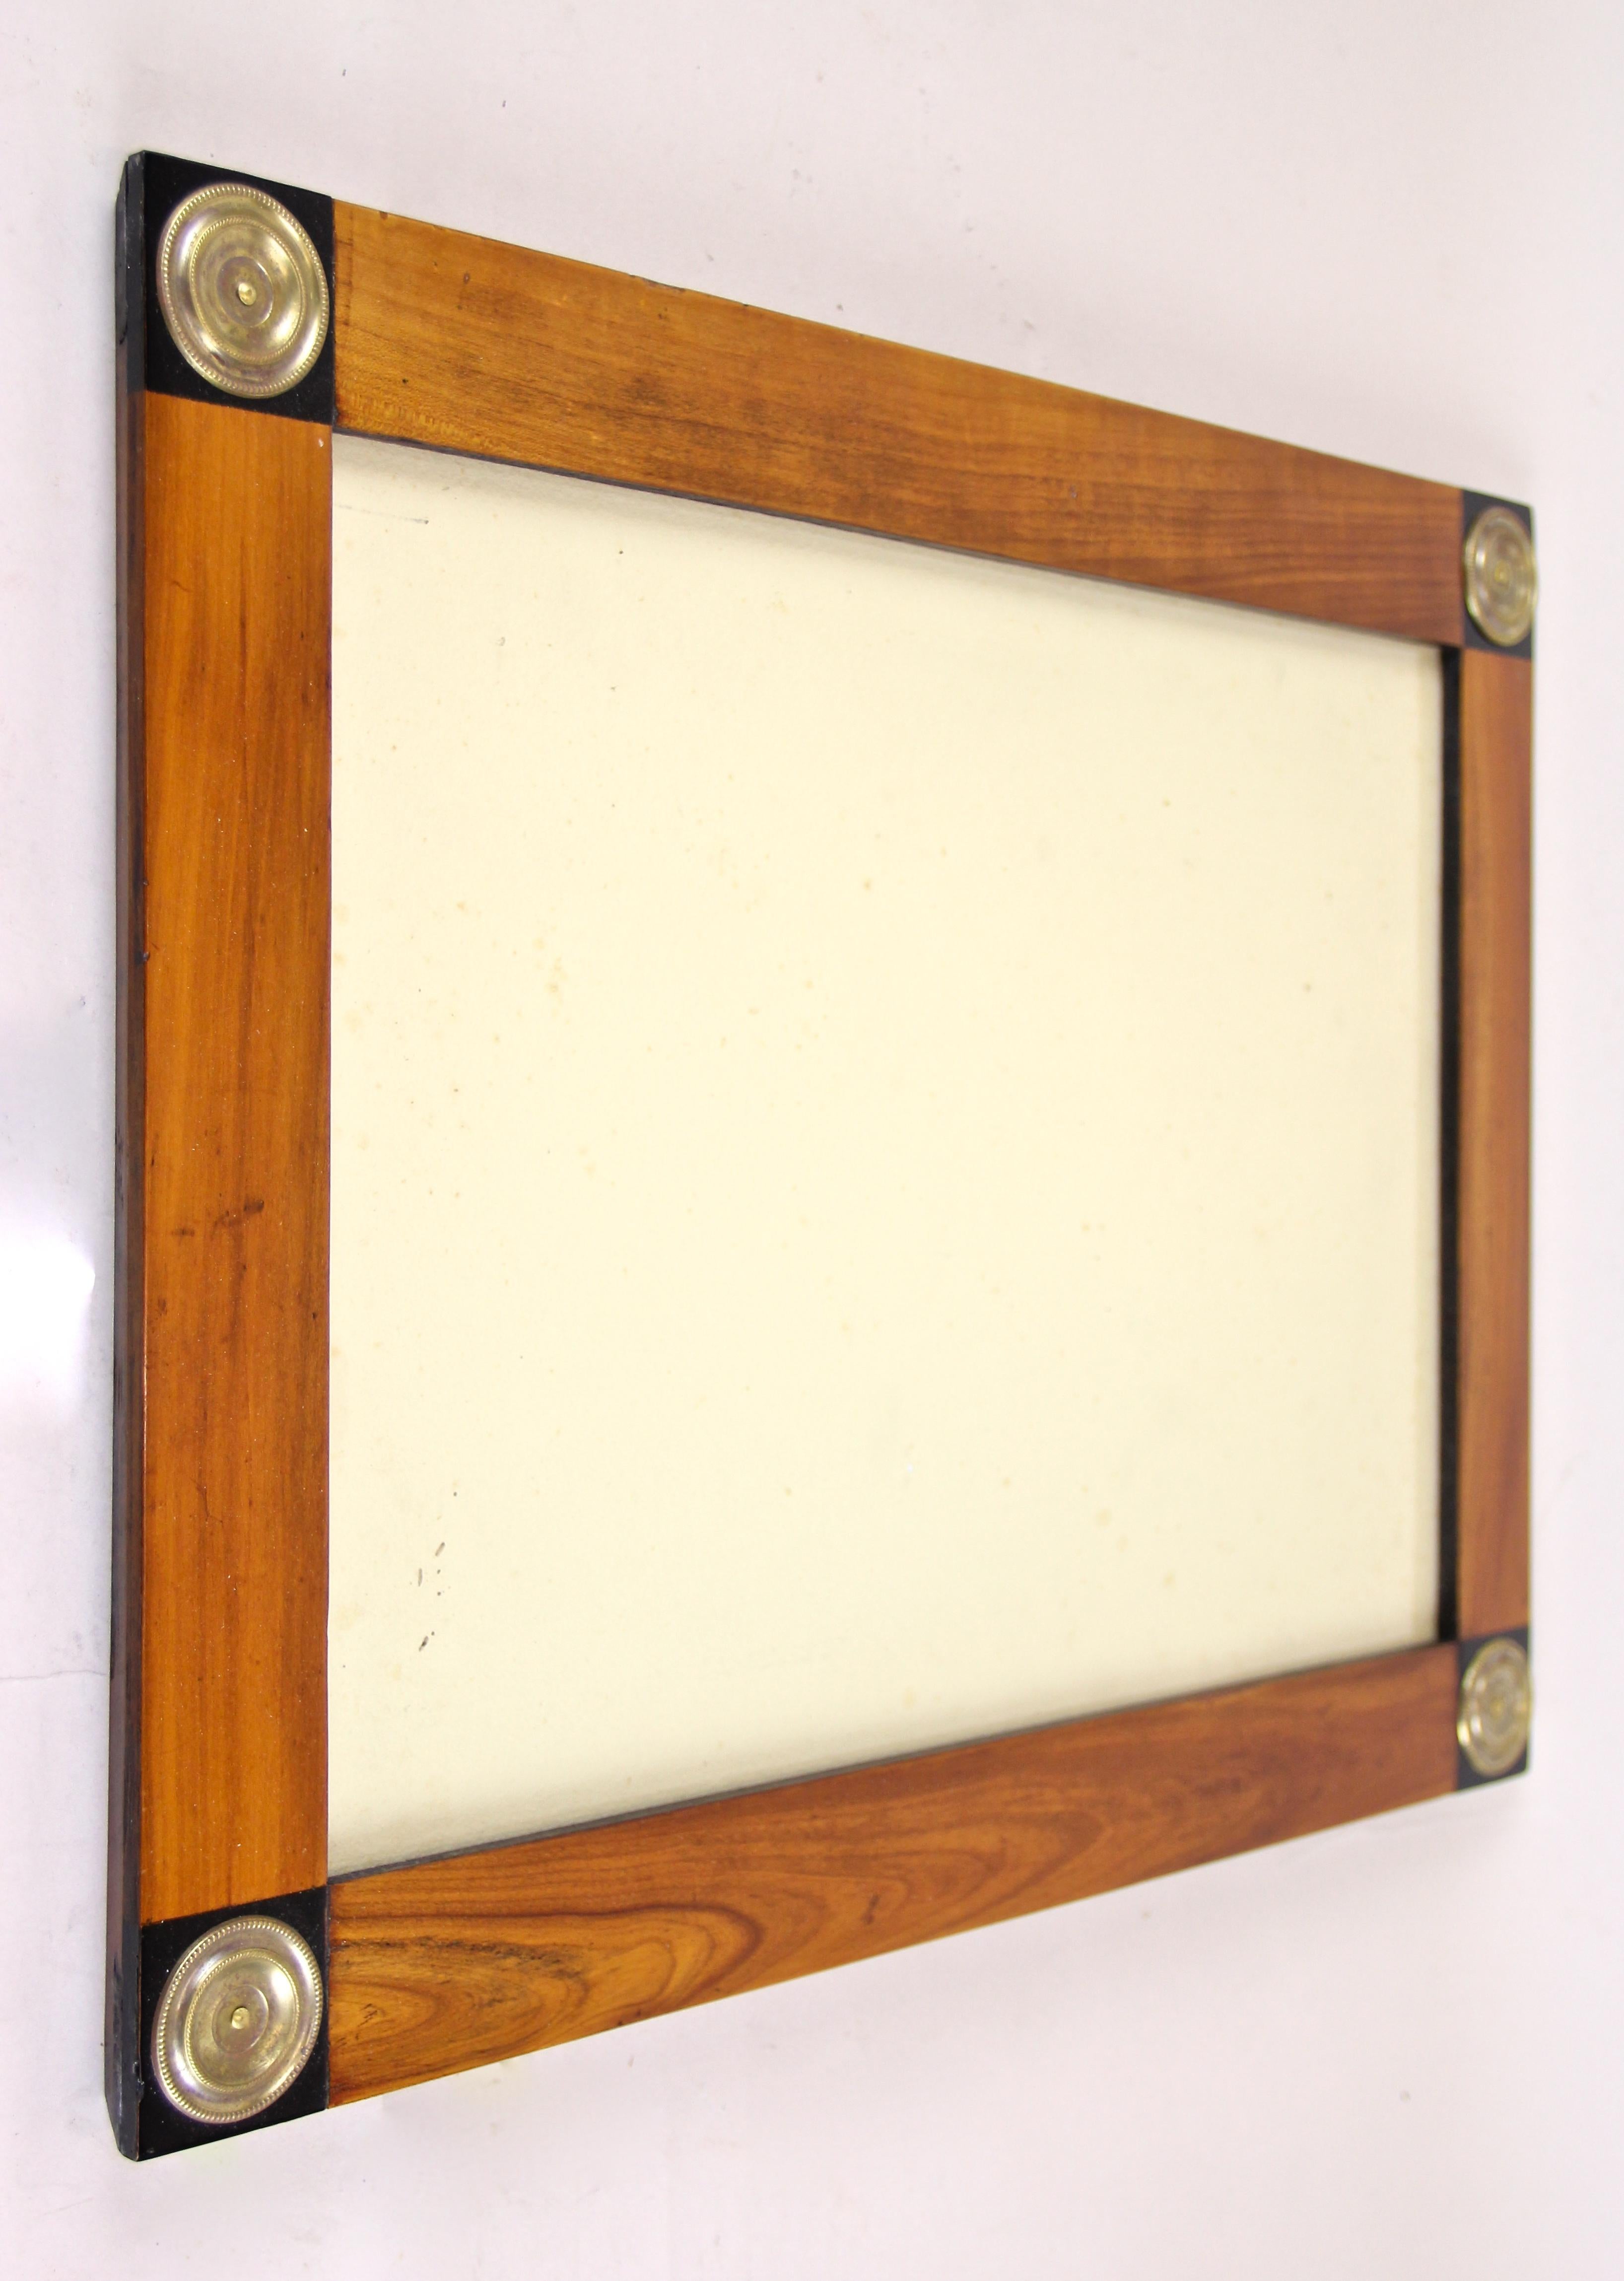 Charming Biedermeier cherrywood picture frame with brass applications out of the transition from Empire to Biedermeier in Vienna/ Austria circa 1815-1820. This lovely early 19th century frame has an overlapped substructure made of spruce wood and